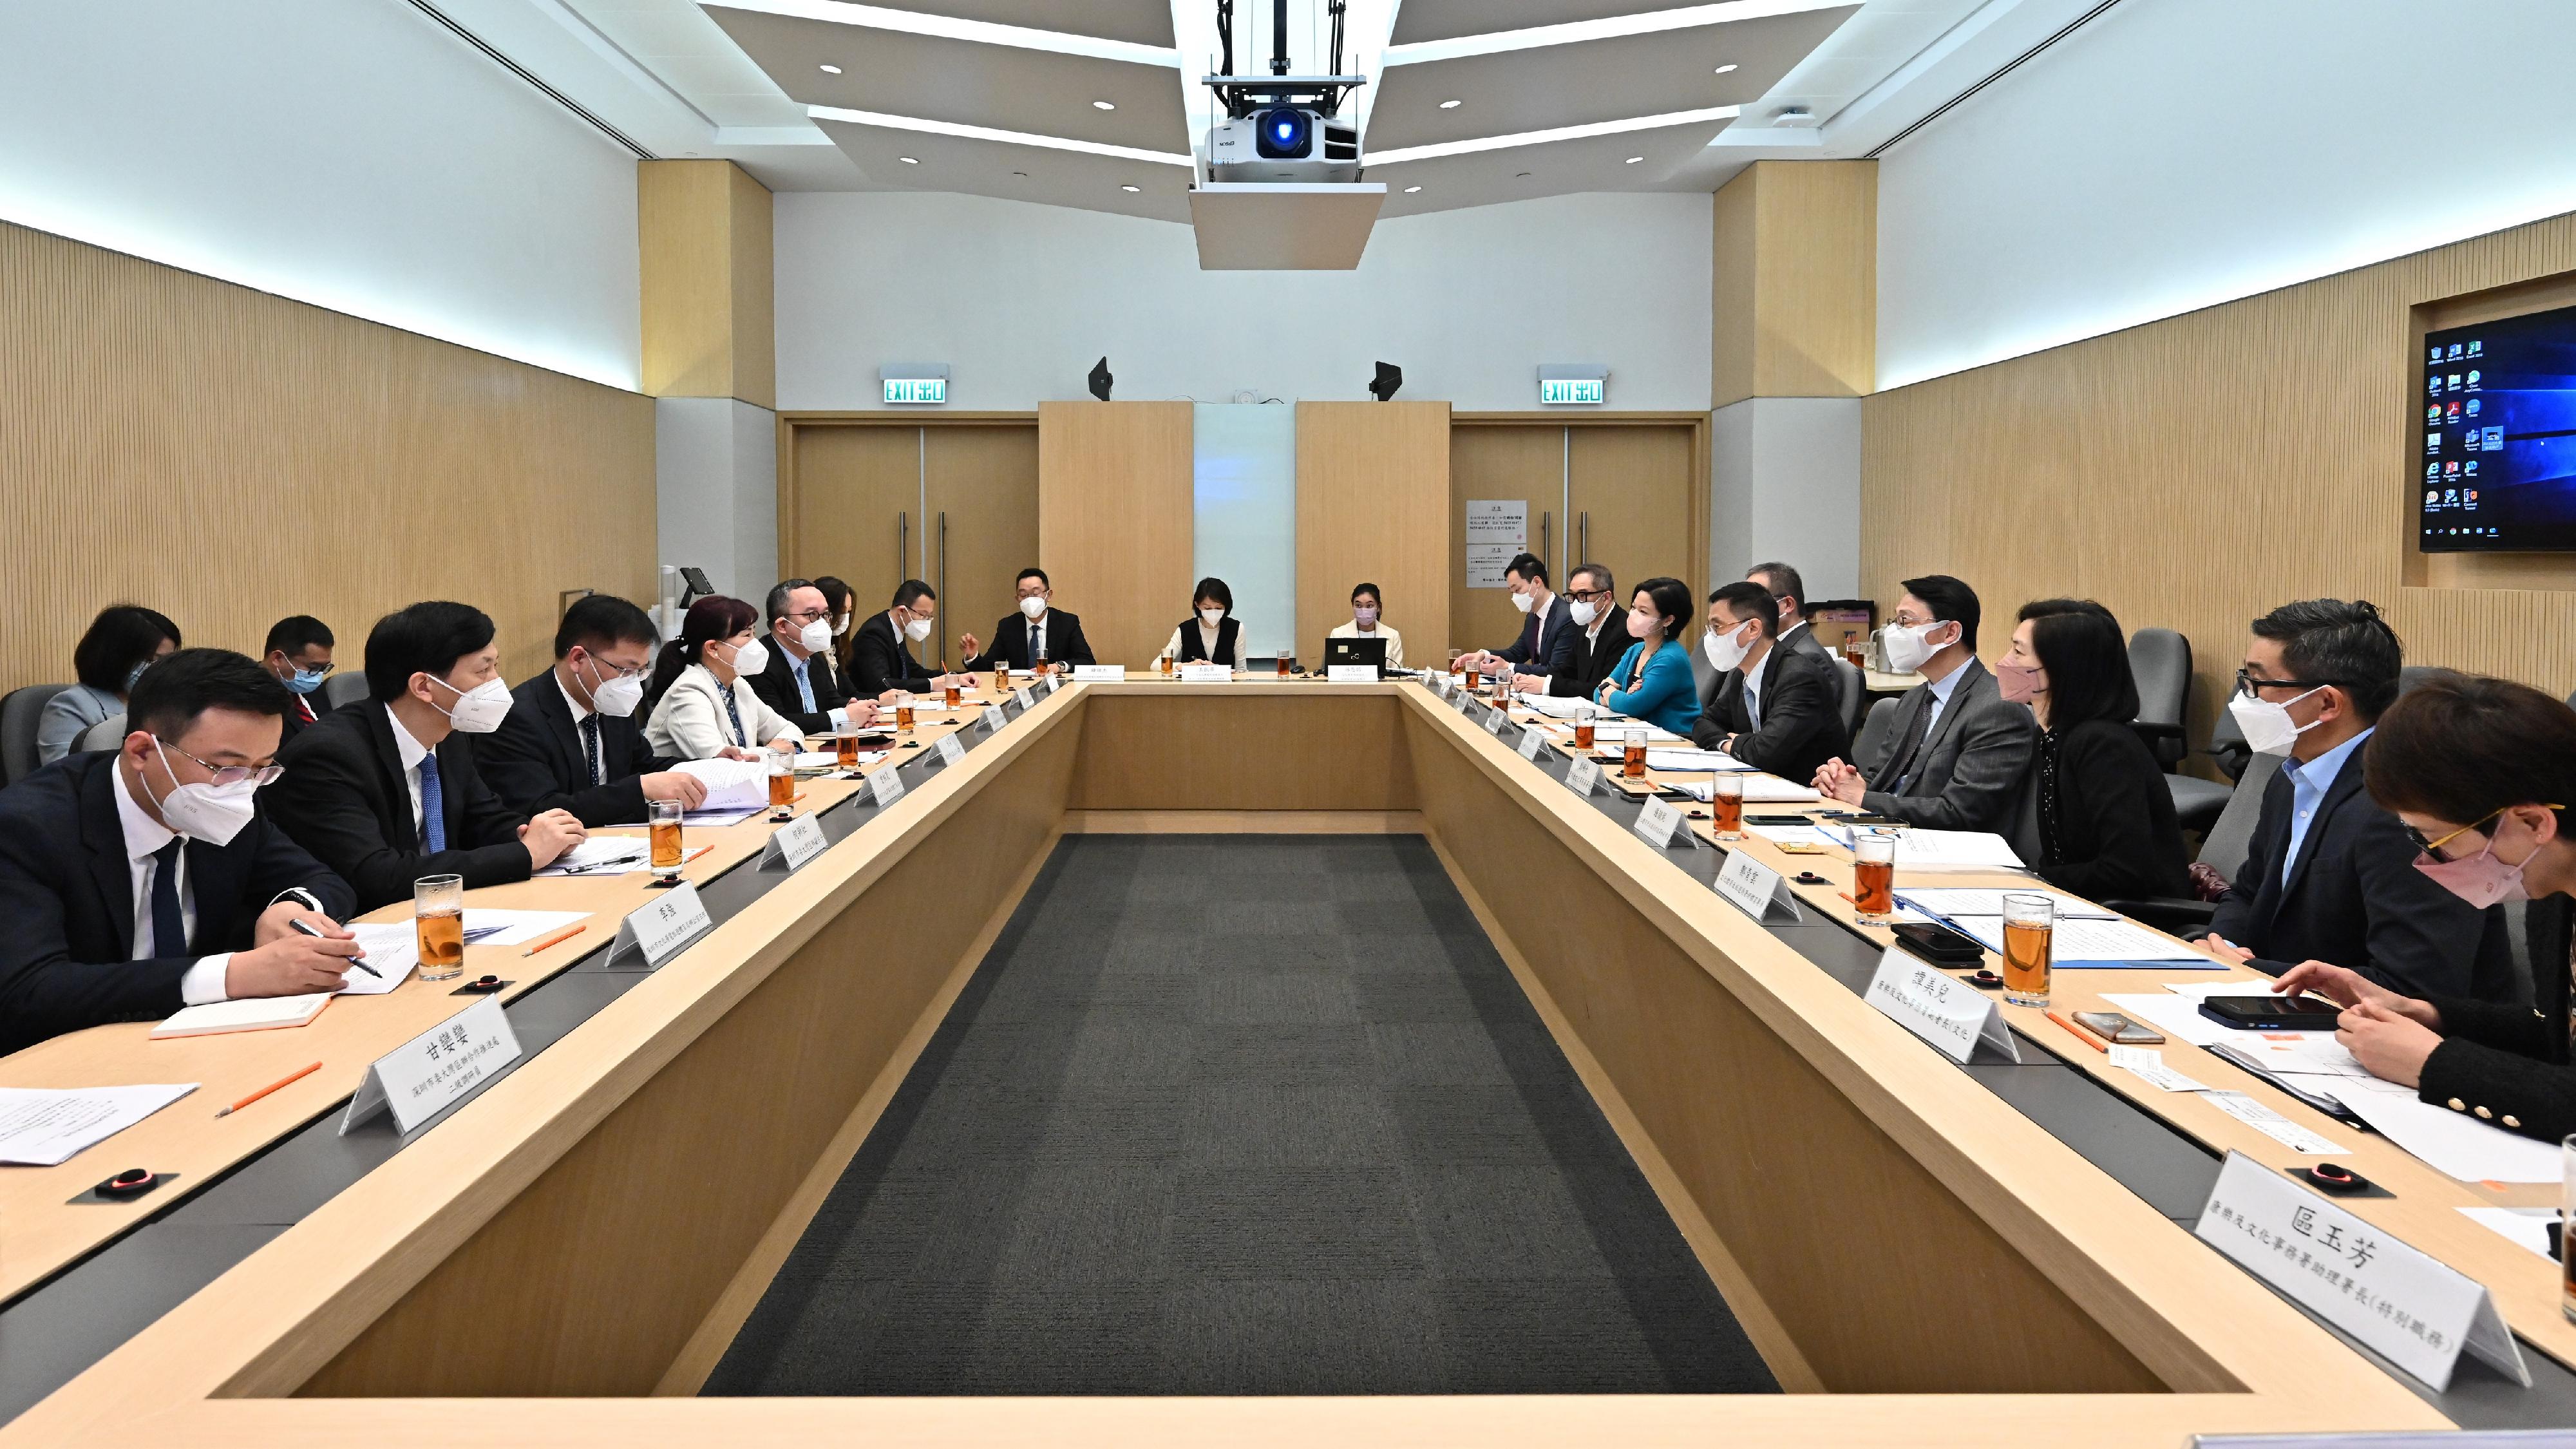 The Secretary for Culture, Sports and Tourism, Mr Kevin Yeung, today (February 10) met with Shenzhen government officials. Photo shows officials exchanging views on issues including deepening co-operation between Hong Kong and Shenzhen on cultural, sports and tourism fronts.